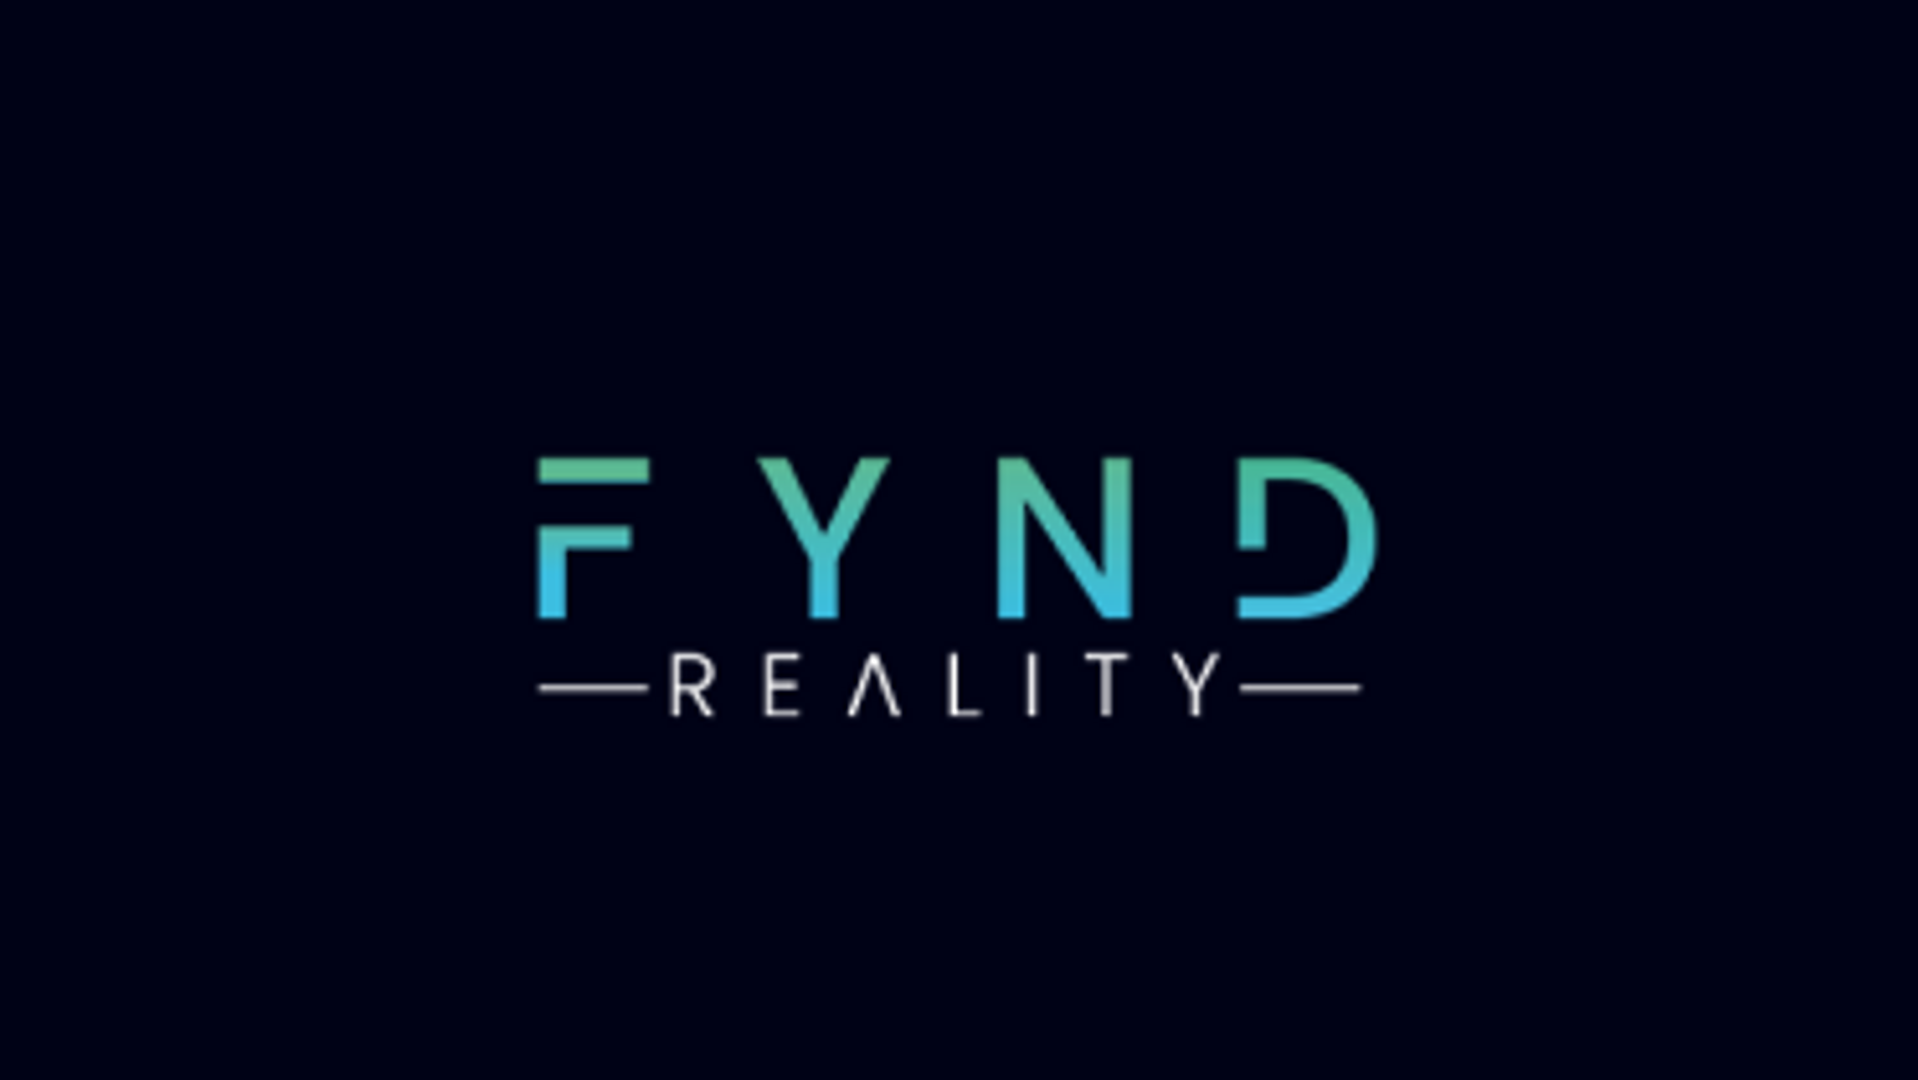 Fynd Reality AS